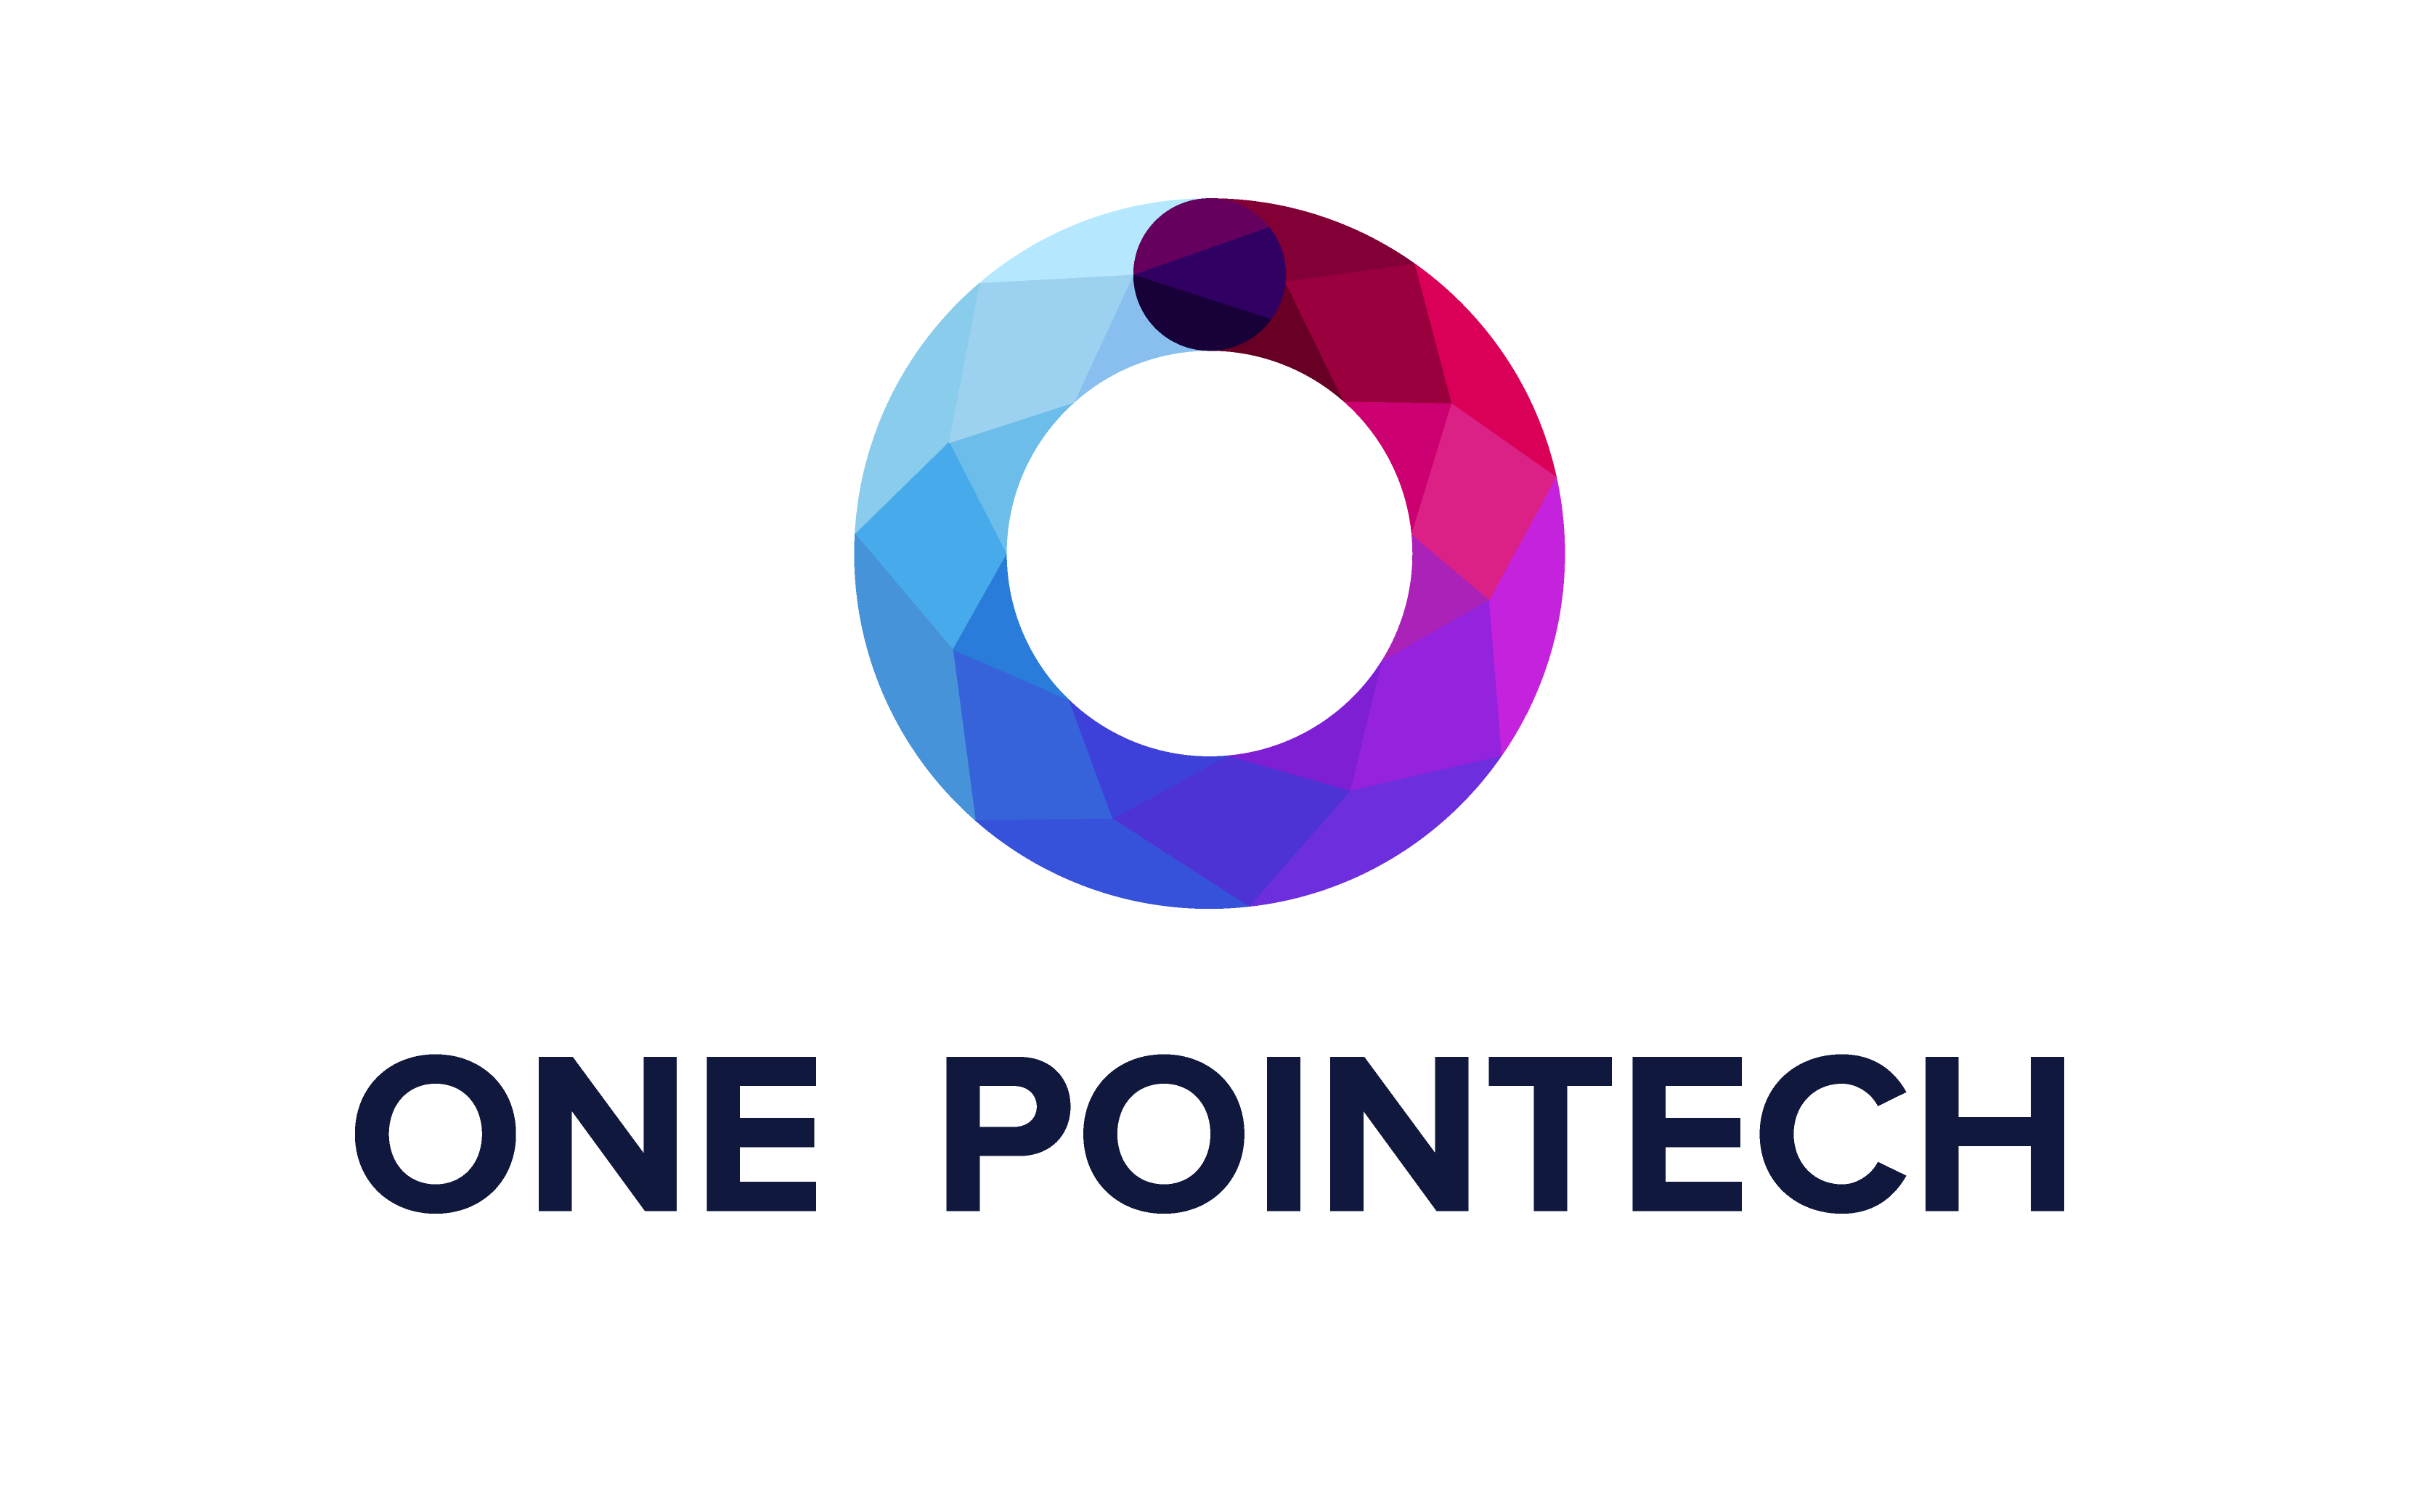 ONE POINTECH